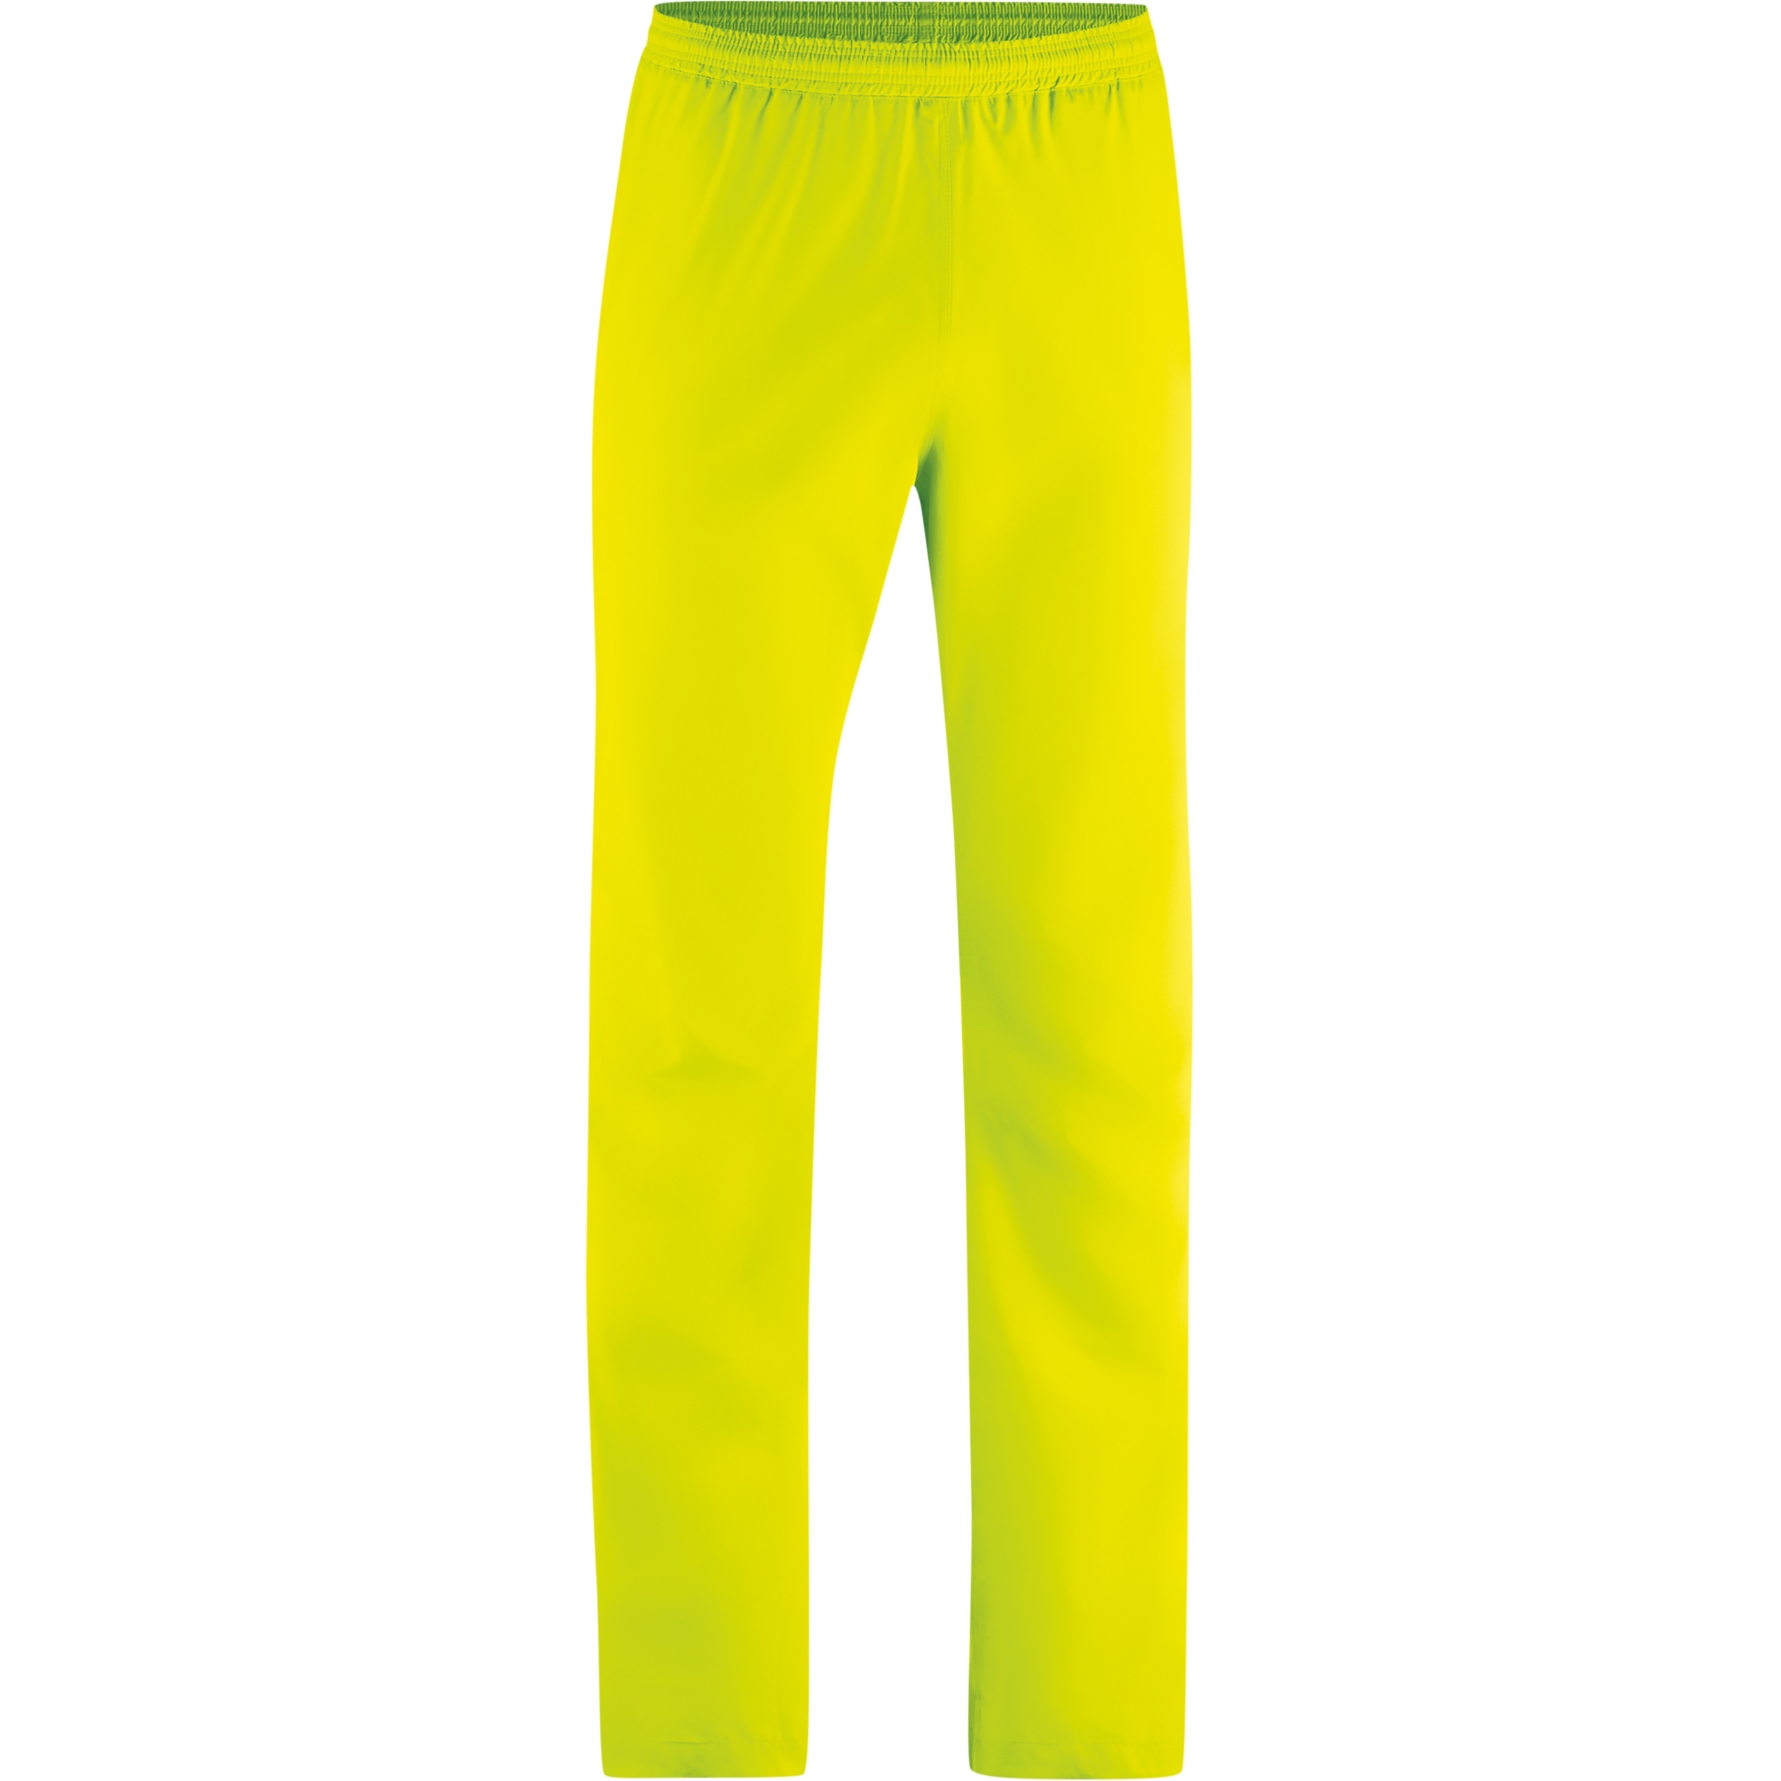 Picture of Gonso Drainon All-Weather Bike Pants Unisex - Short - Safety Yellow